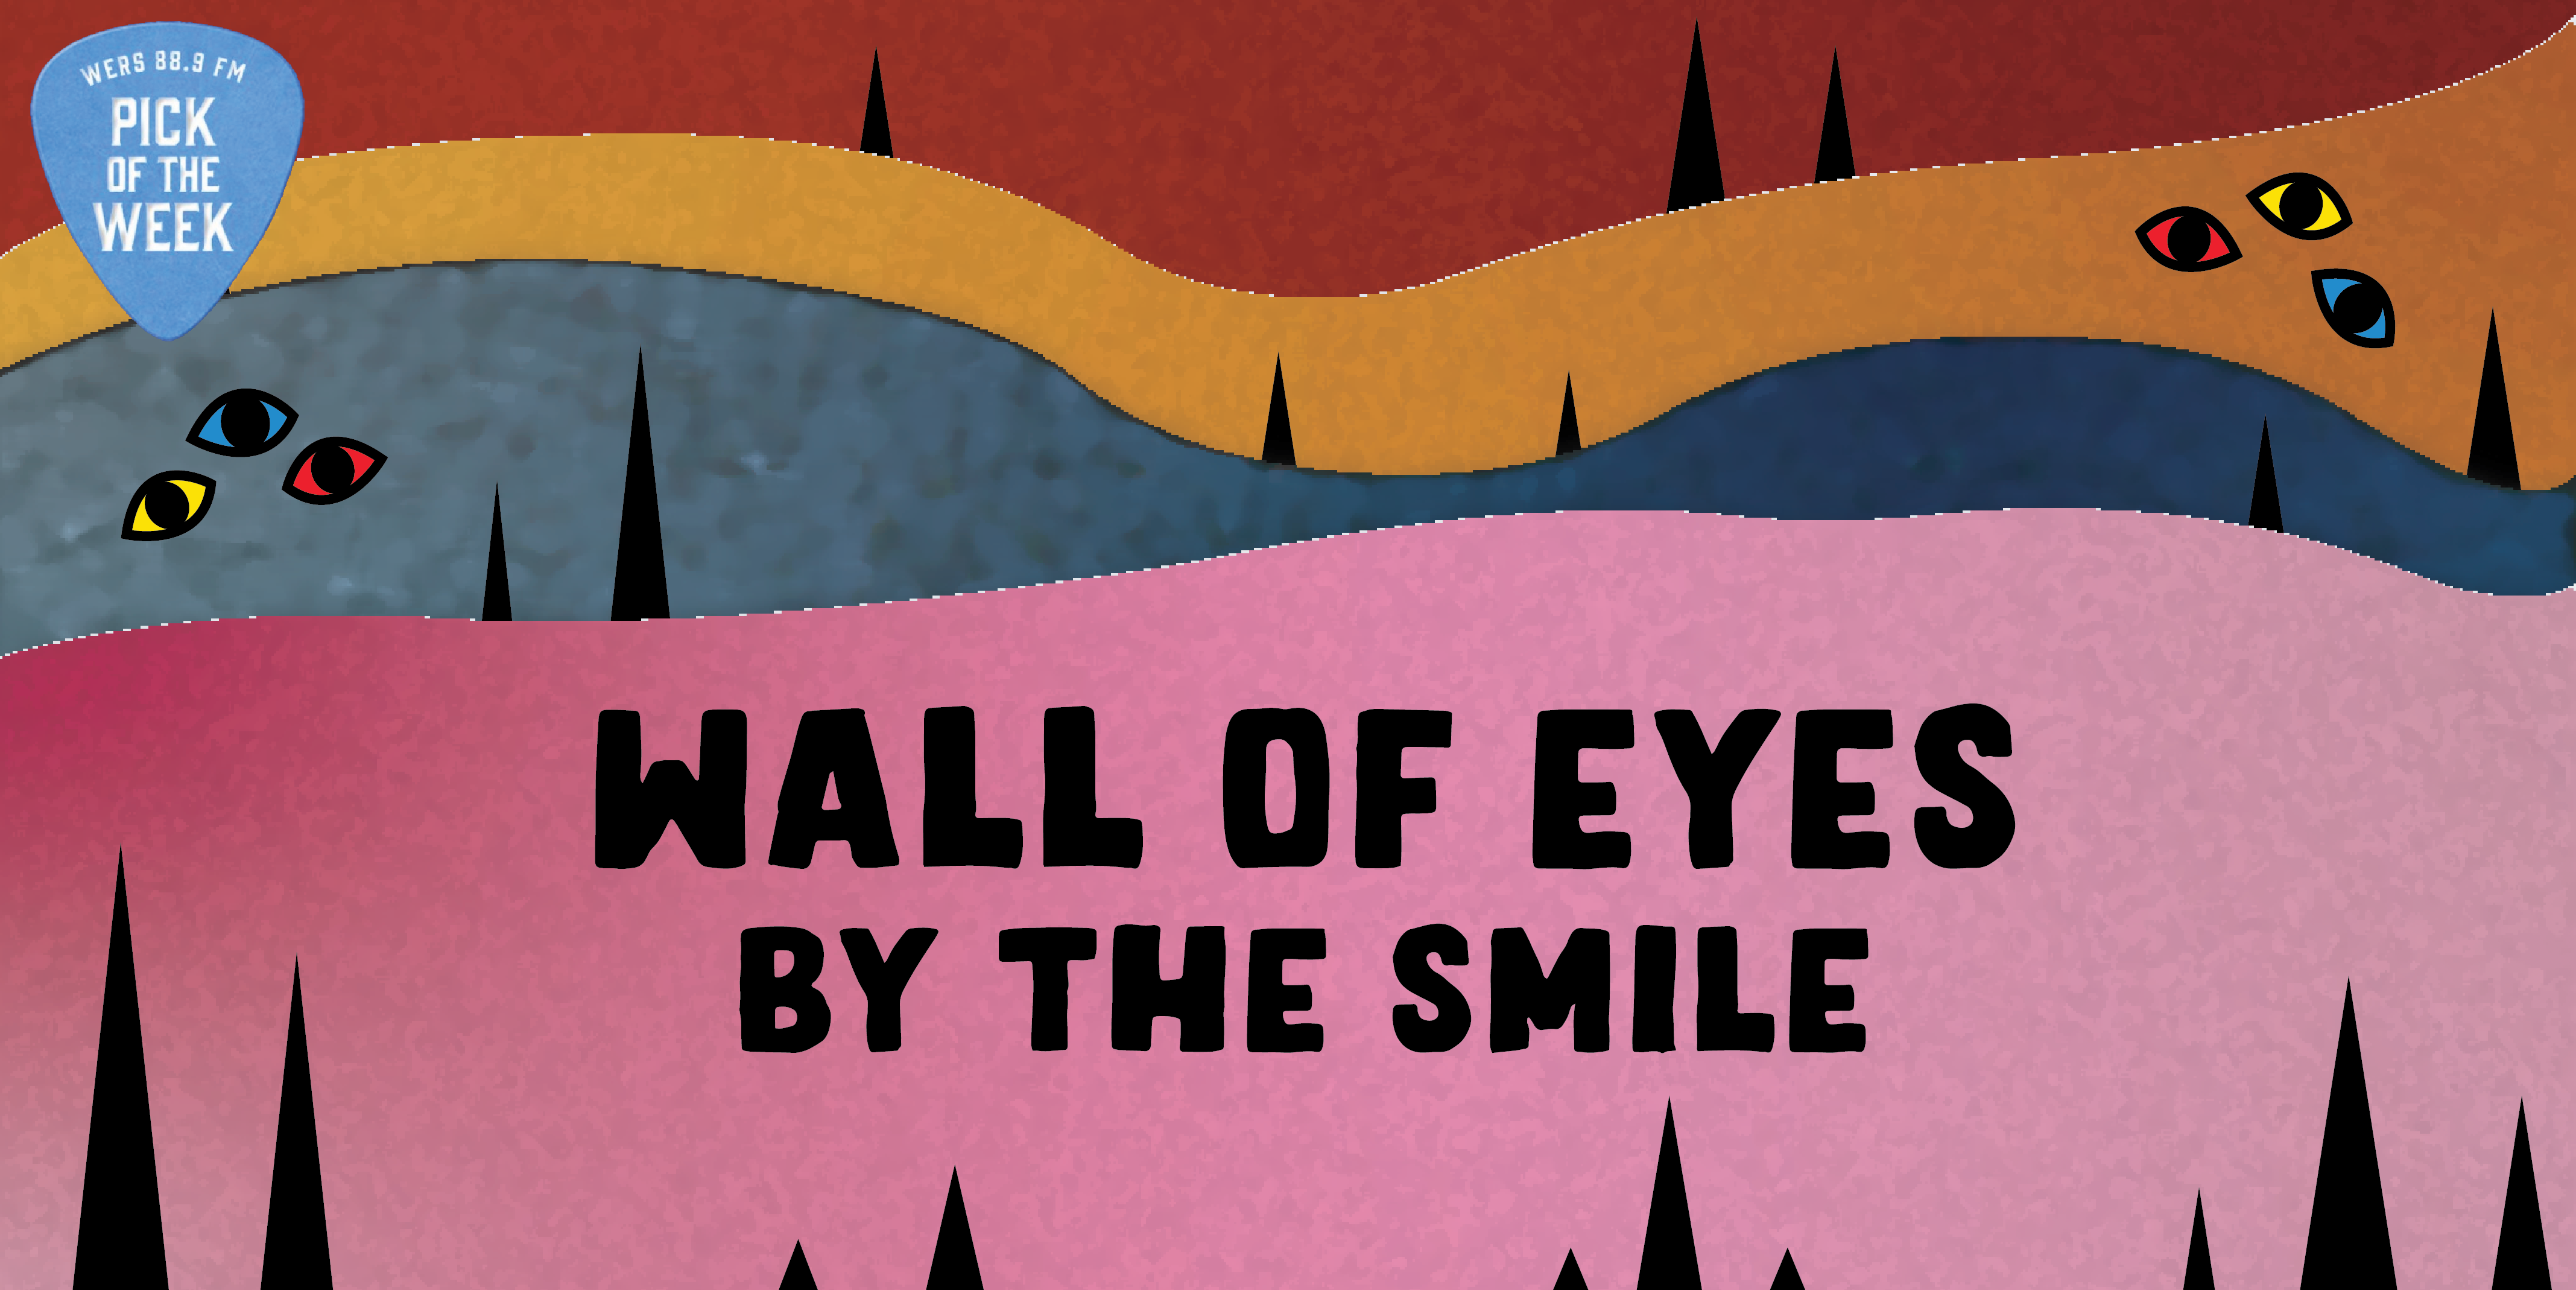 Pick of the Week: The Smile Wall of Eyes - WERS 88.9FM